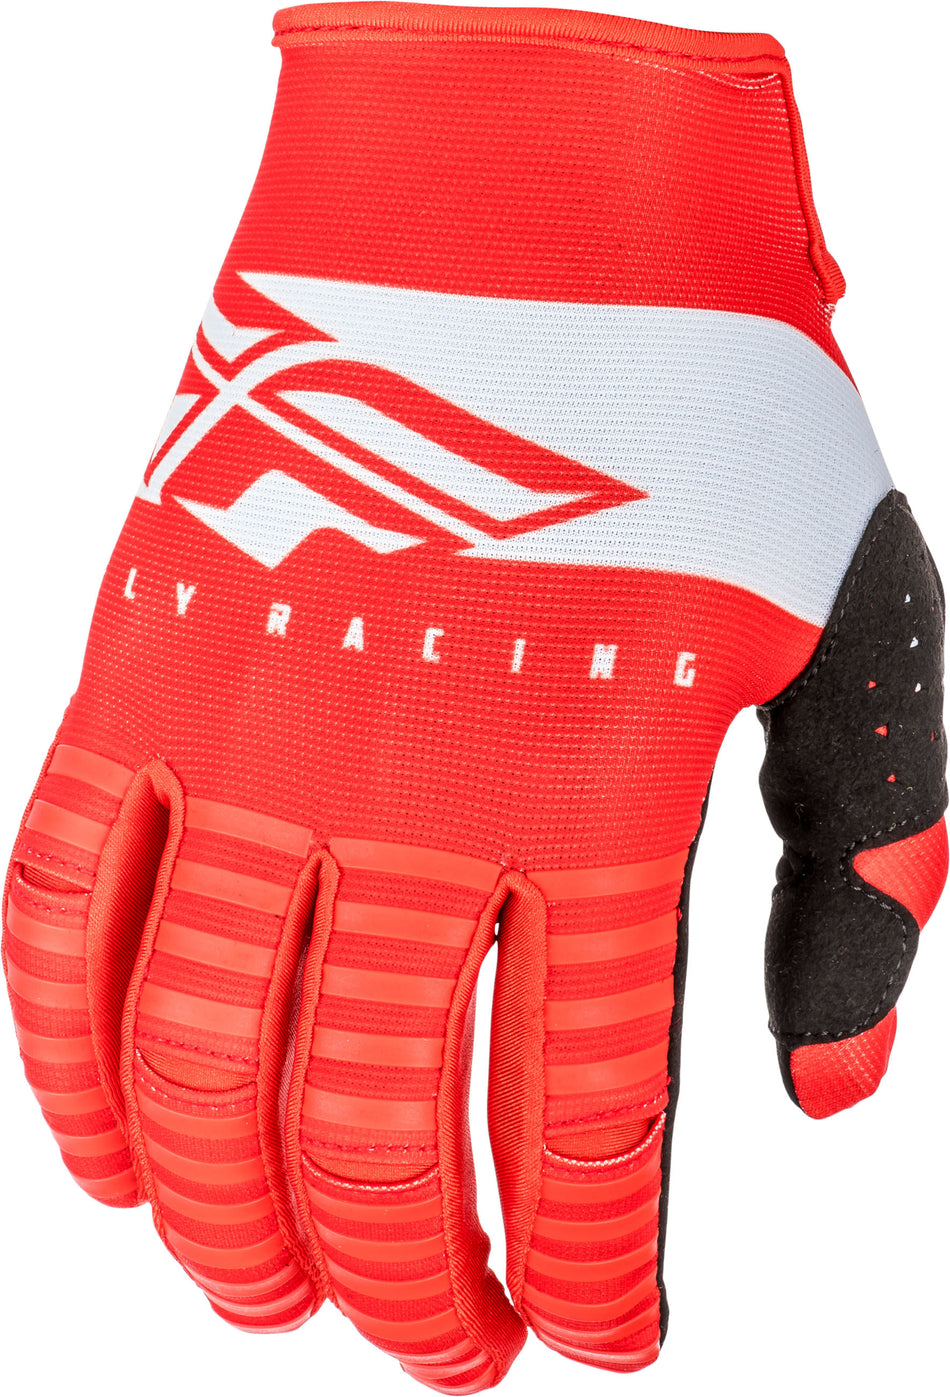 FLY RACING Kinetic Shield Gloves Red/White Sz 07 372-41207